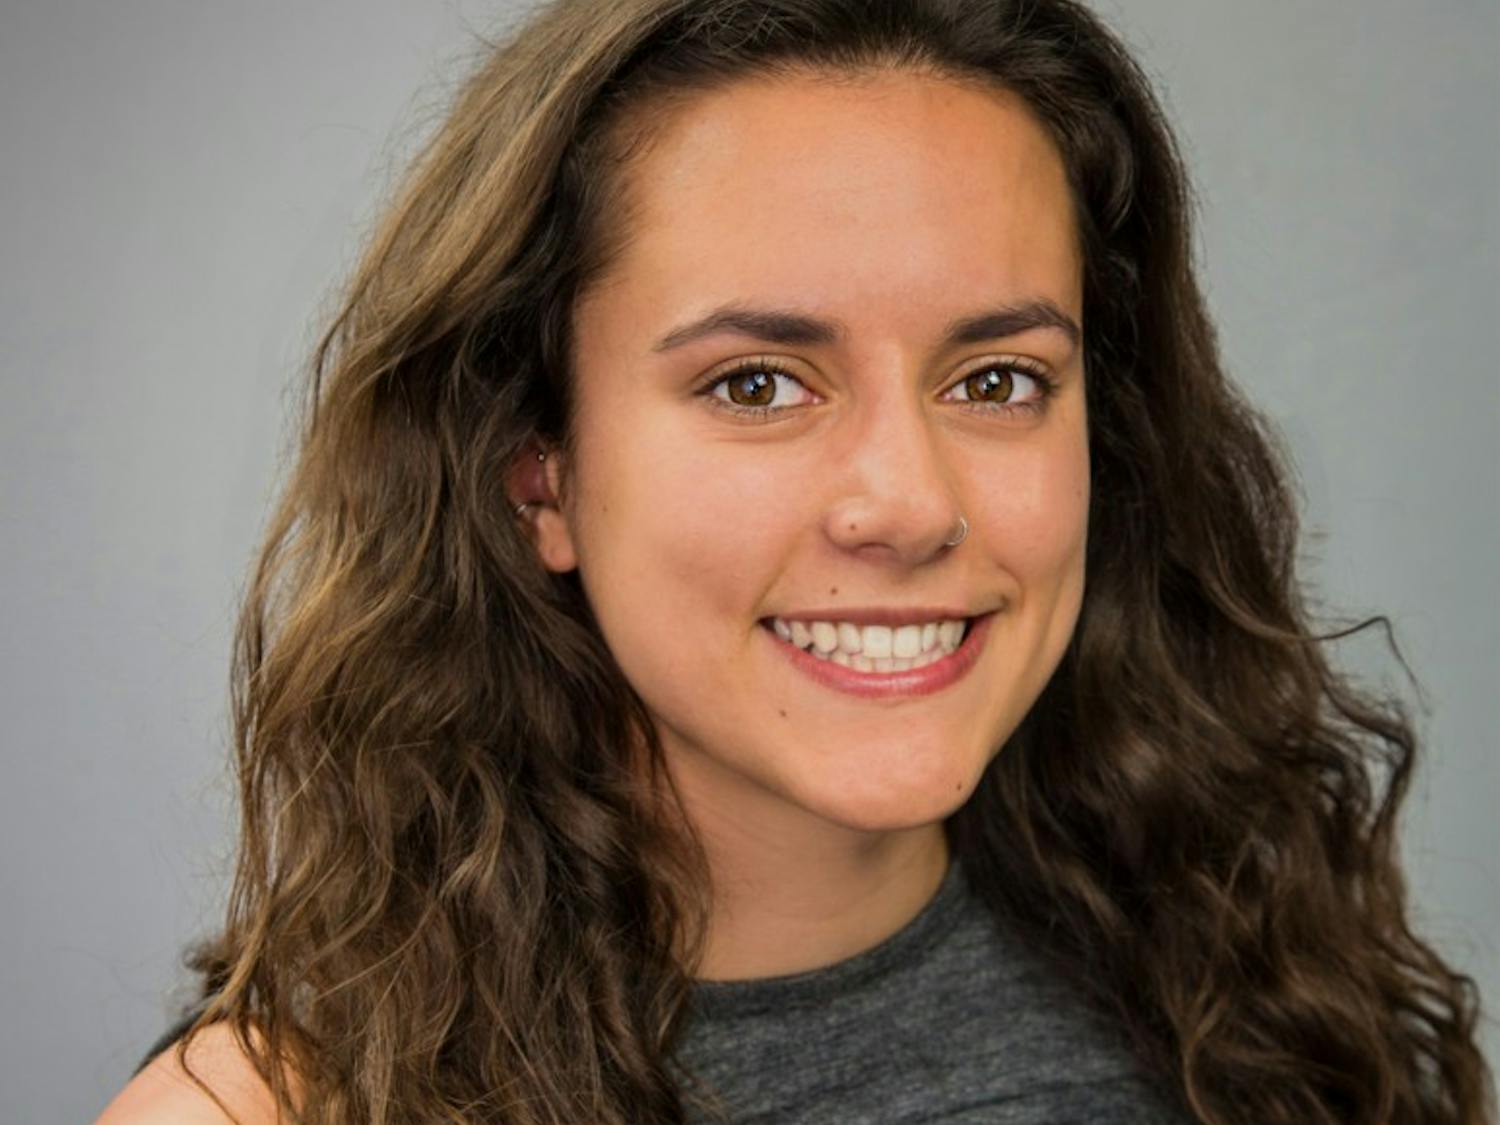 Gianna Damico came to UB unsure about what she wanted to pursue. Now between balancing academics, athletics and art, she’s unsure about what to pursue first.